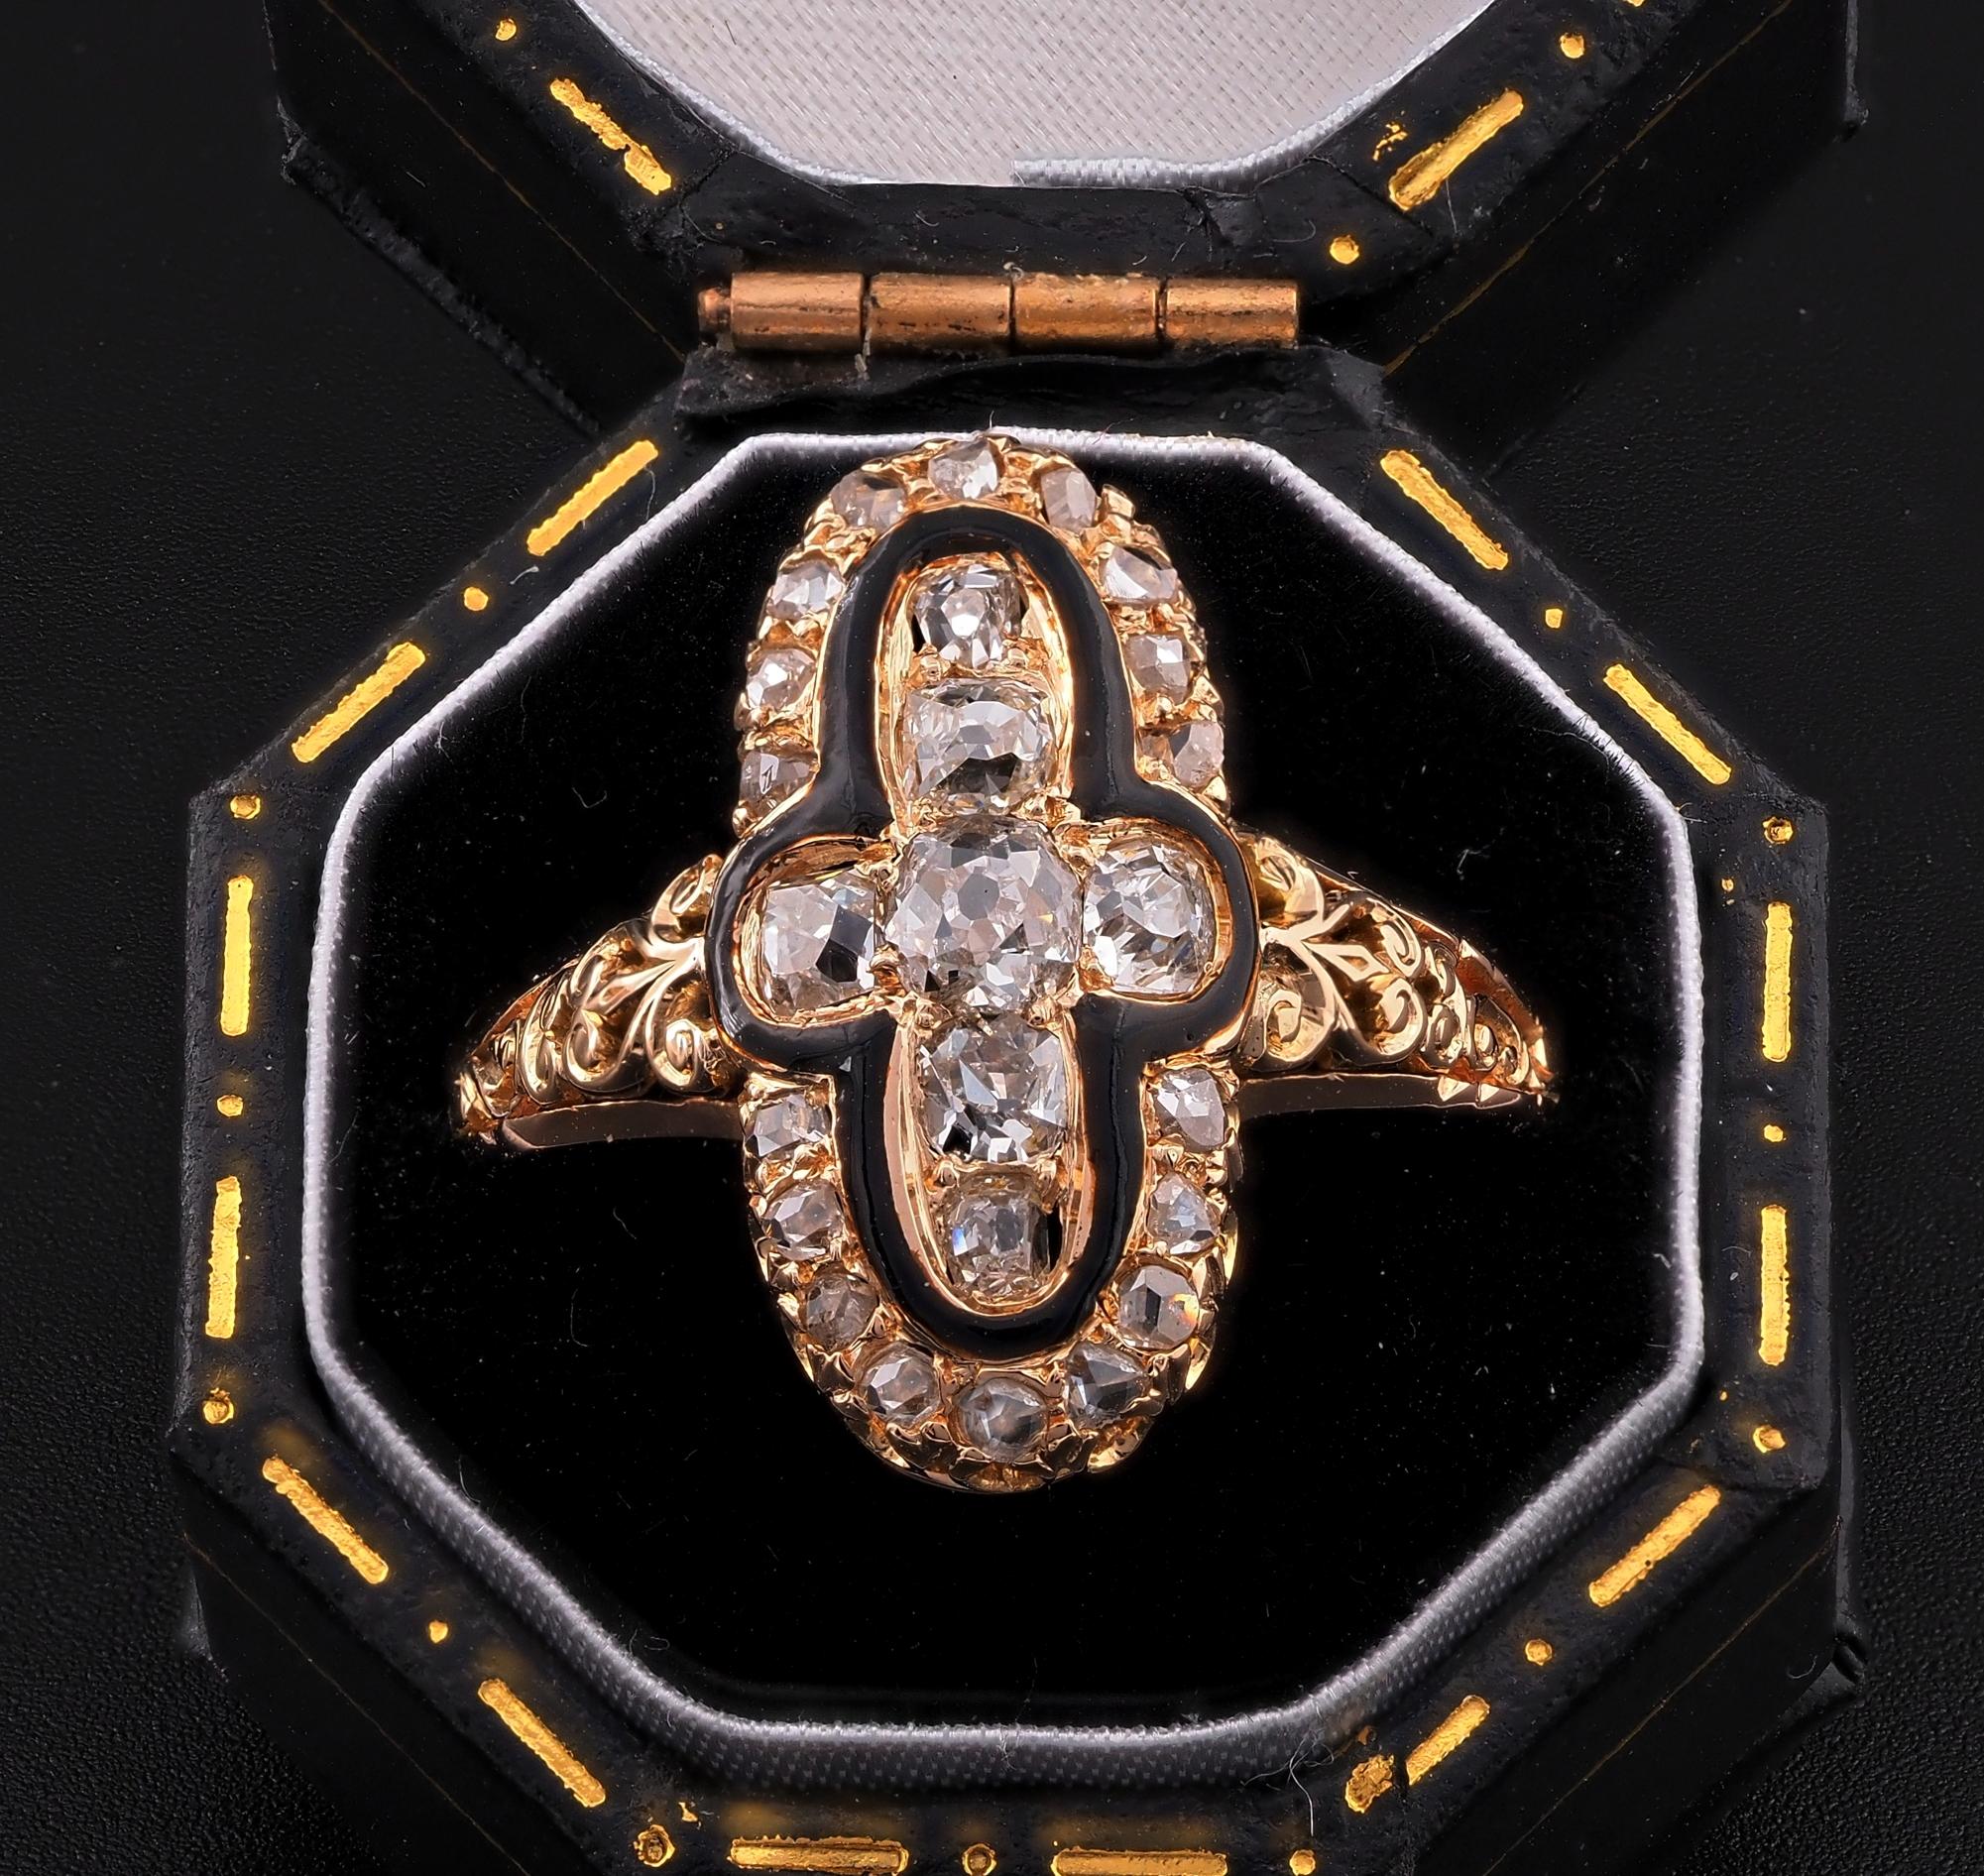 Gothic Cross
This outstanding Gothic inspired, custom made vintage ring is artful hand crafted of solid 14 Kt gold, marked inside with assay and maker marks, it was made on commission during 1950 ca
Richly detailed under-gallery, deeply engraved